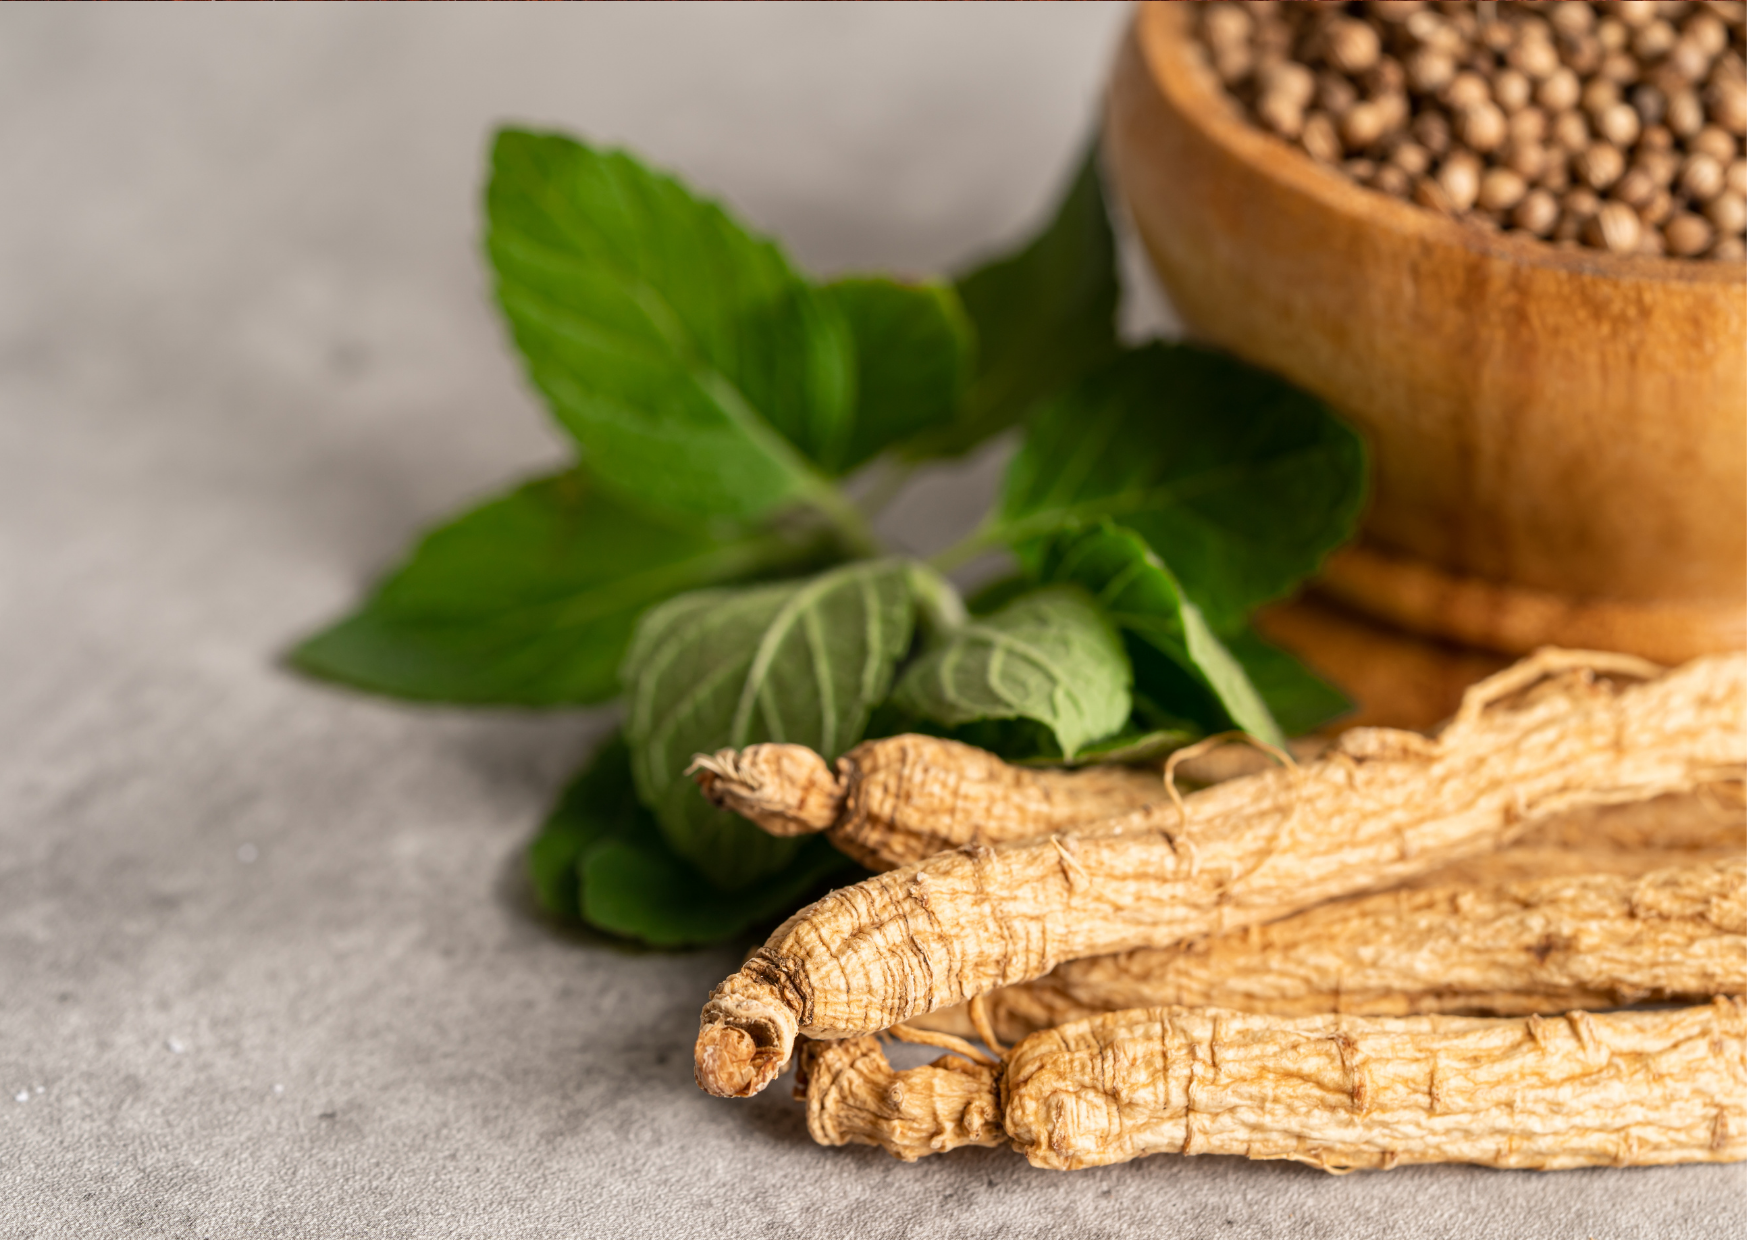 Panax Ginseng is one of the most beneficial adaptogens and a great ingredient for stress relief